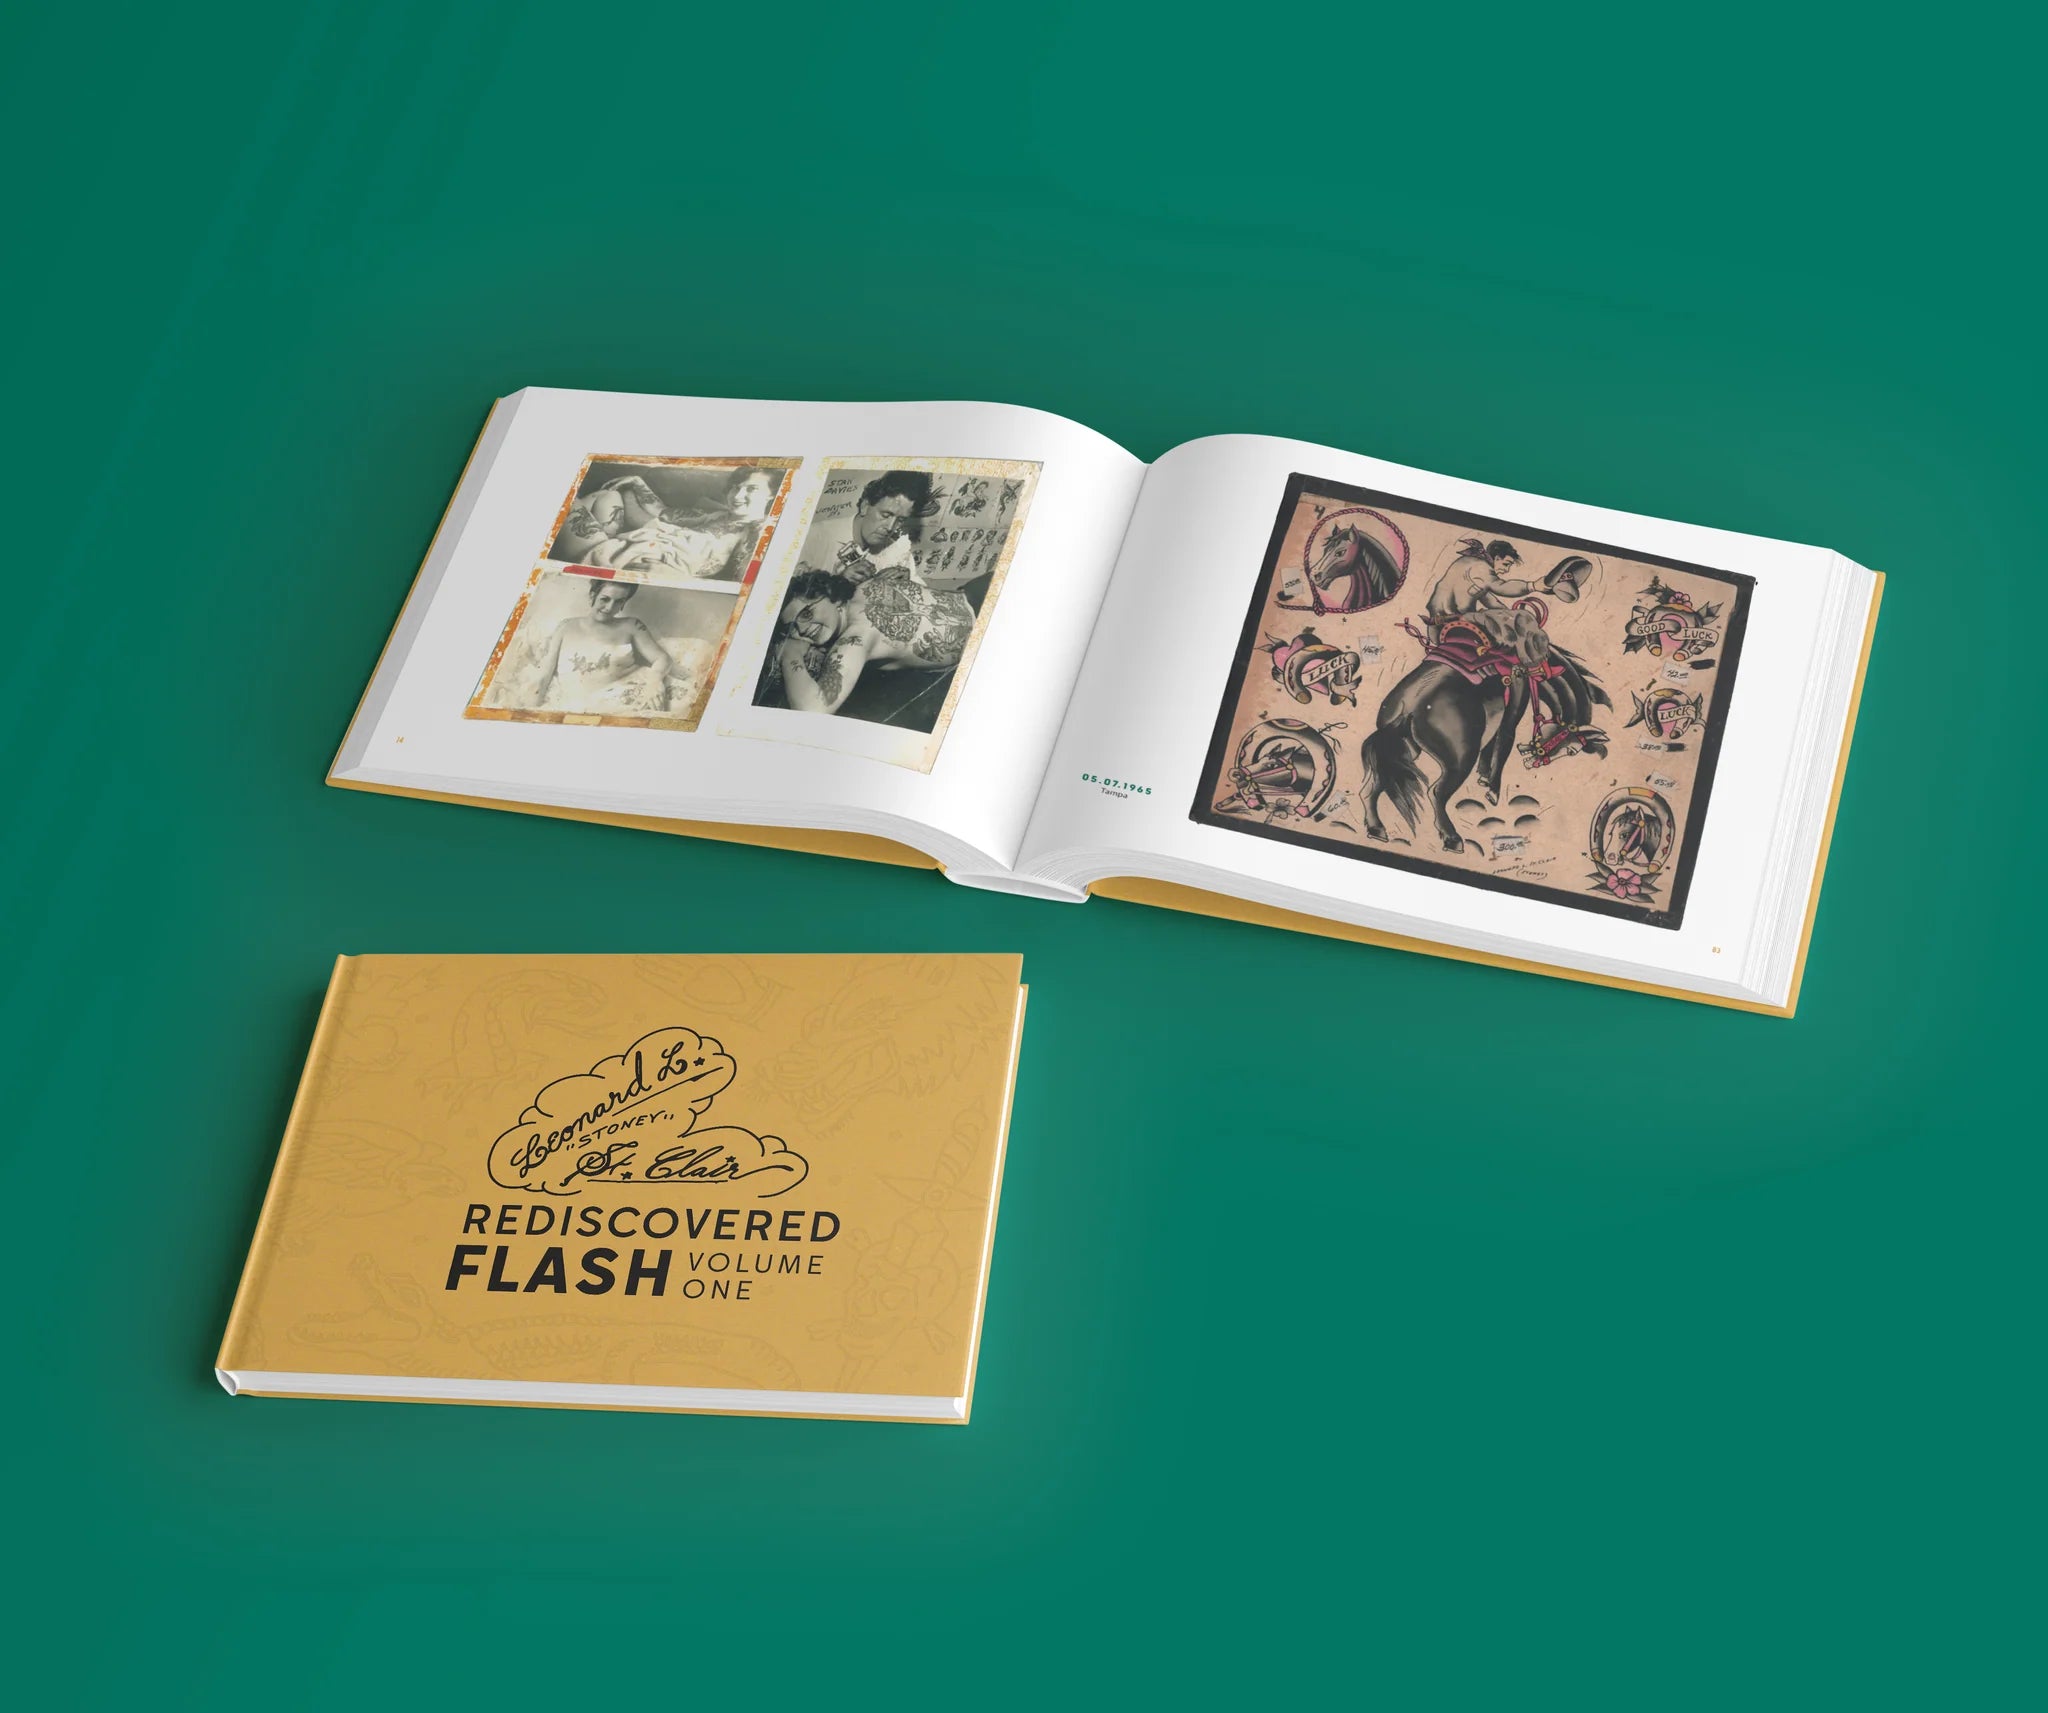 “Stoney” St. Clair Rediscovered Flash Volume 1 — Softcover Book